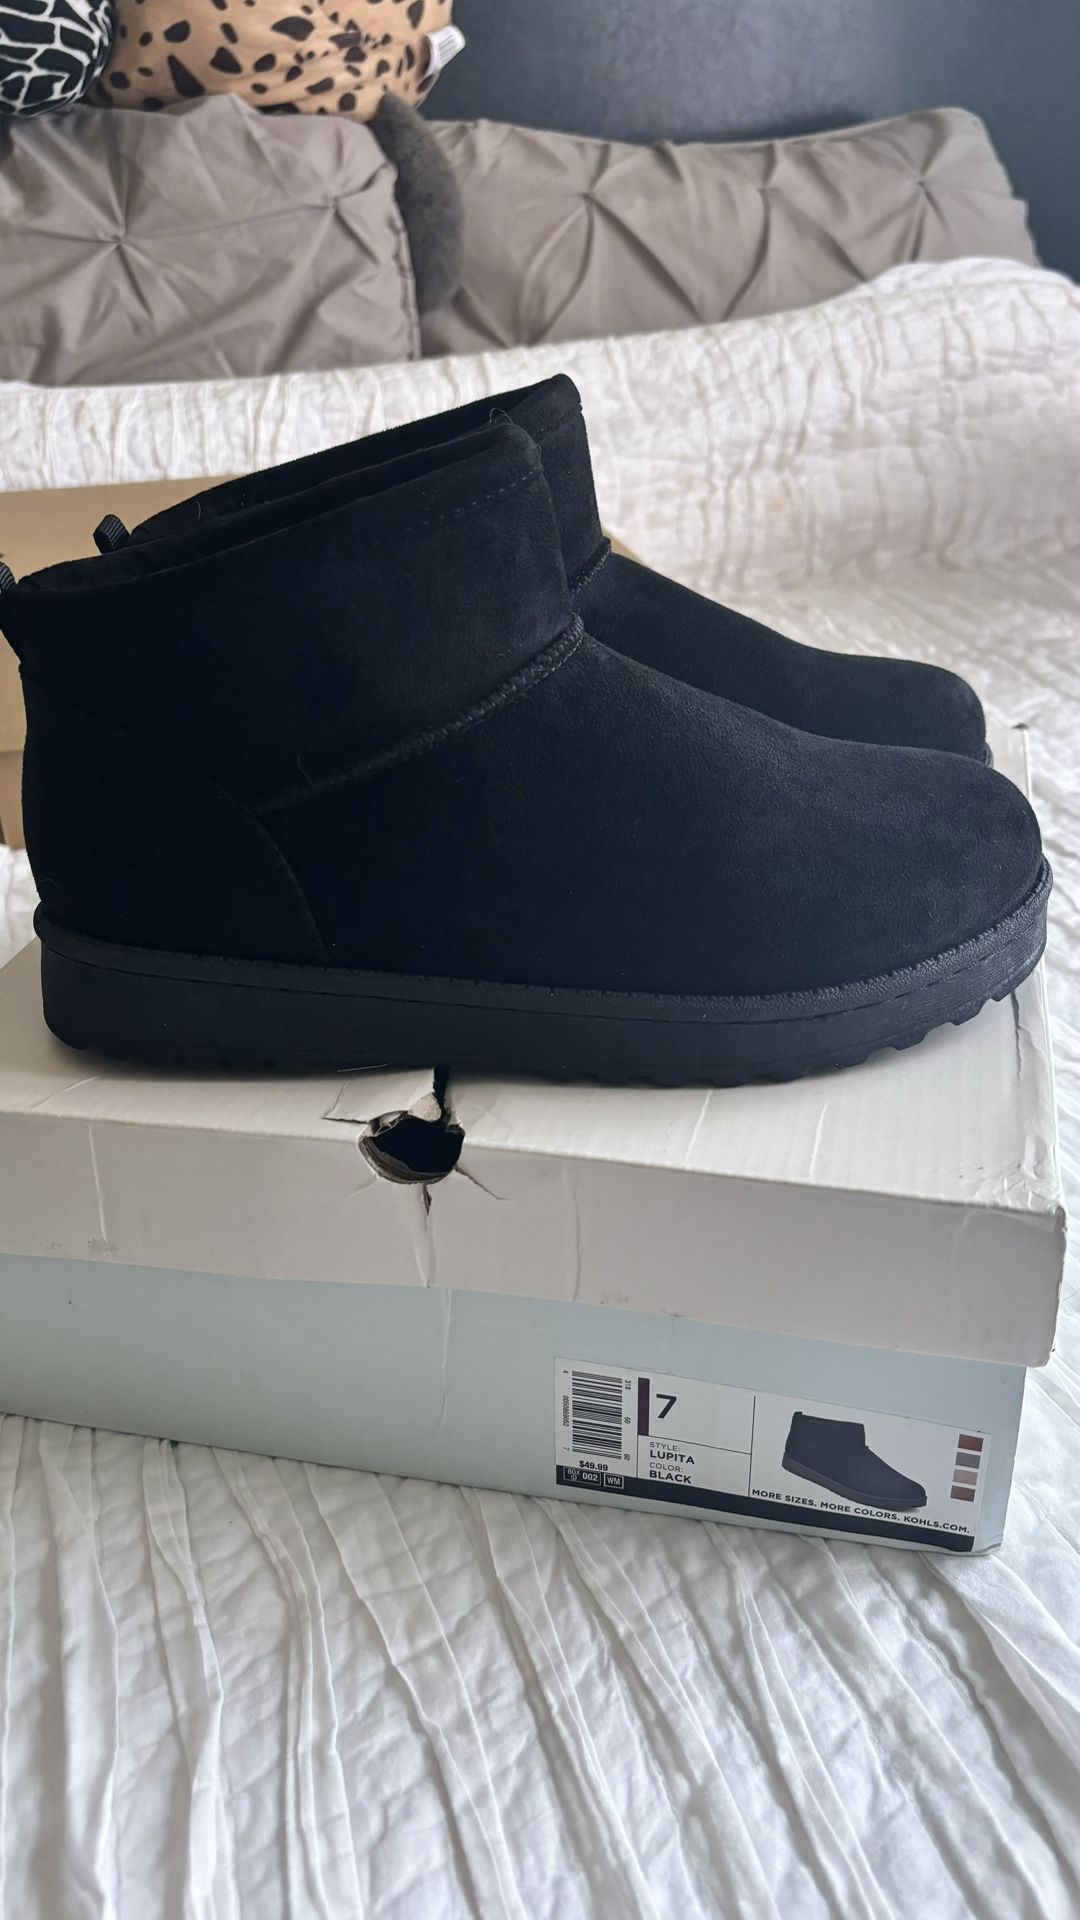 SO Women’s Black Booties Size 7 Brand New-Never Worn-In Box Damaged box, please see last picture